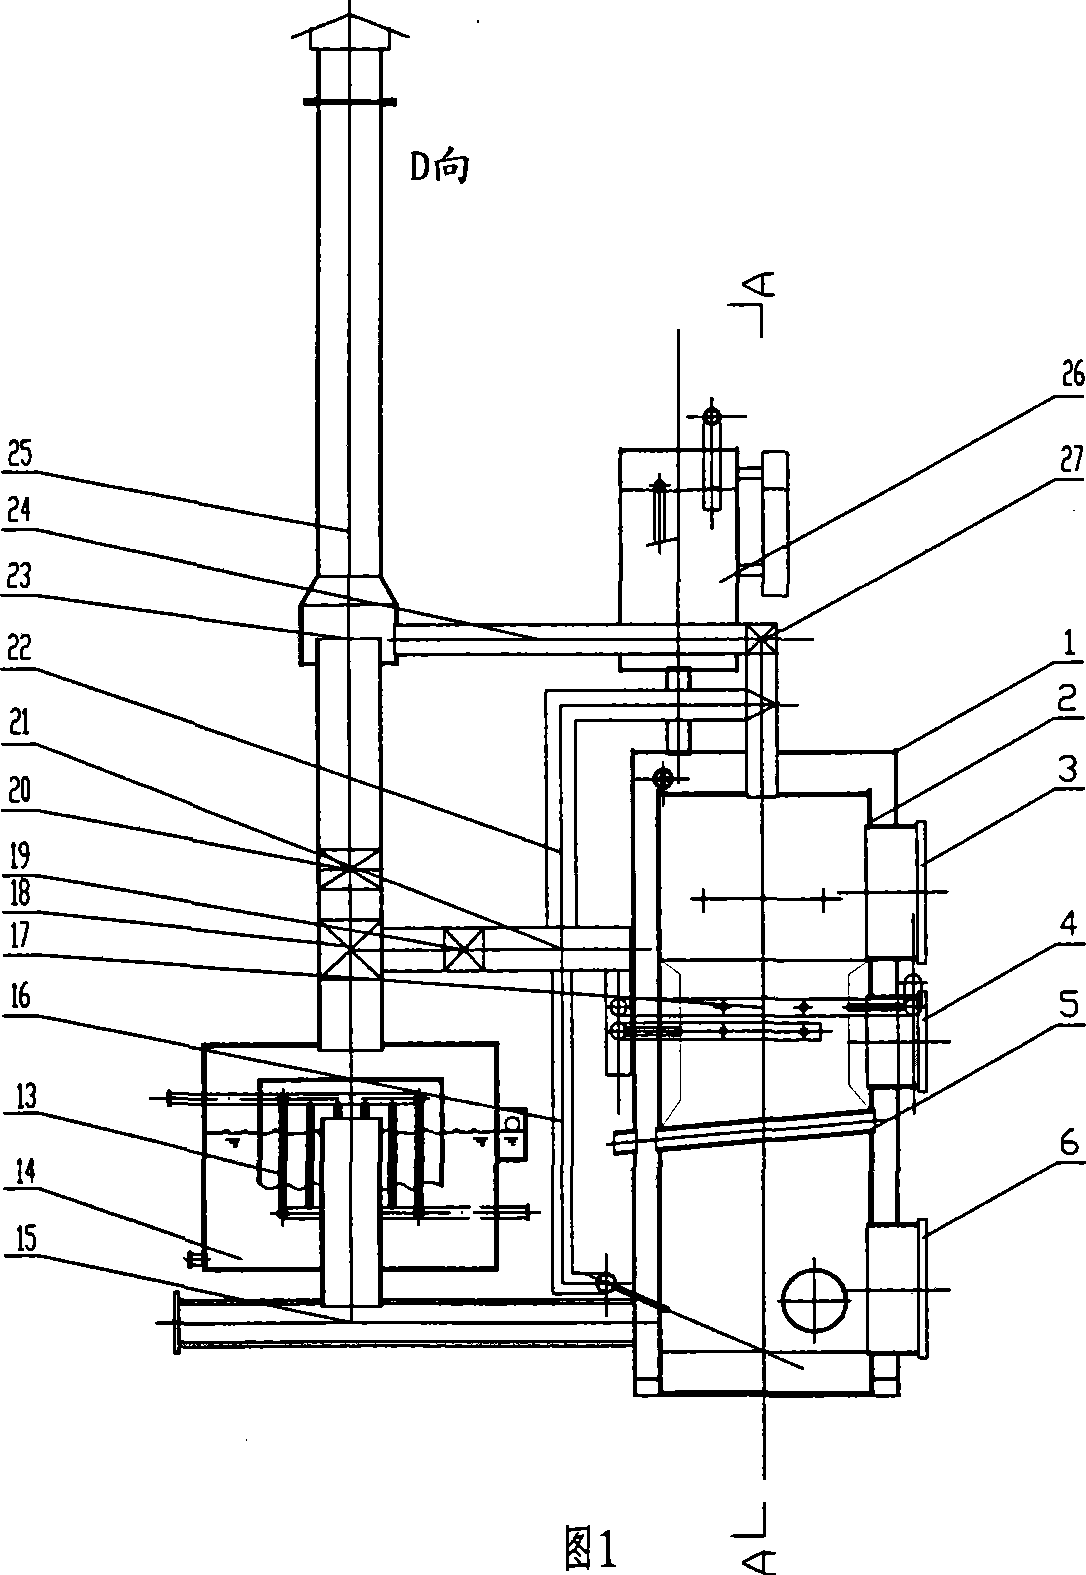 Coal gasification boiler by reverse coal combustion